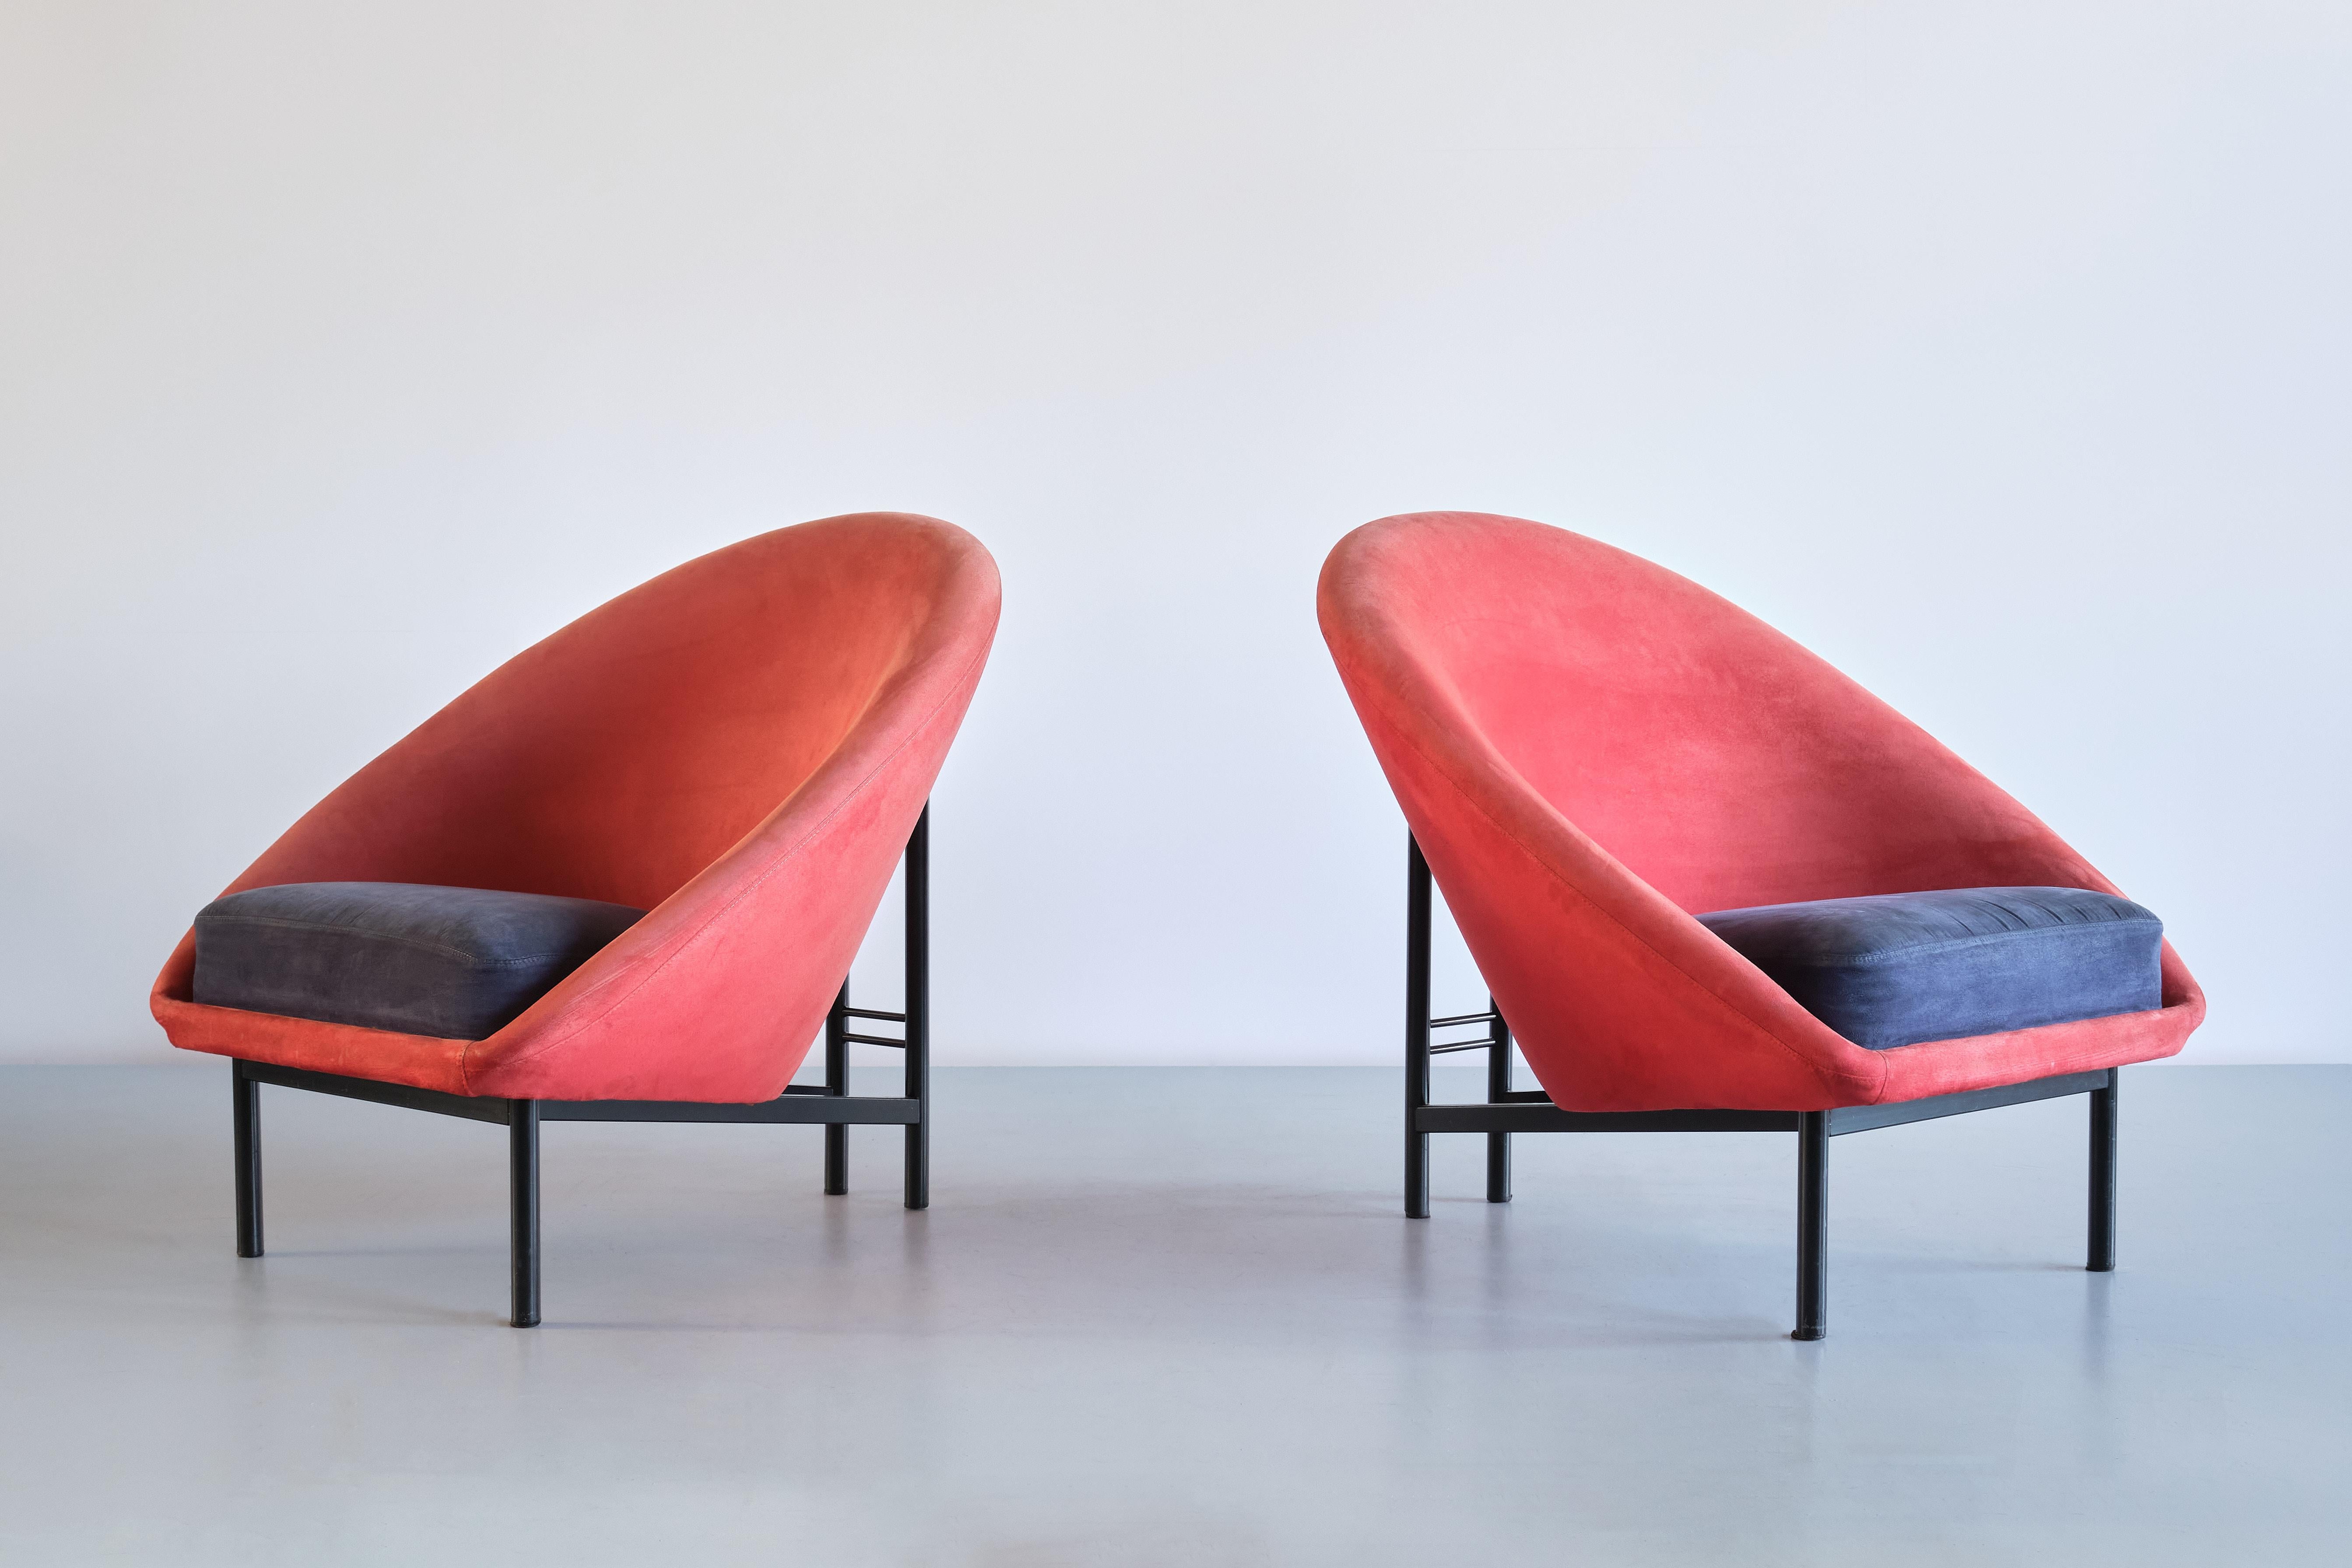 Pair of Theo Ruth 'F815' Lounge Chairs, Artifort, Netherlands, 1960s For Sale 8